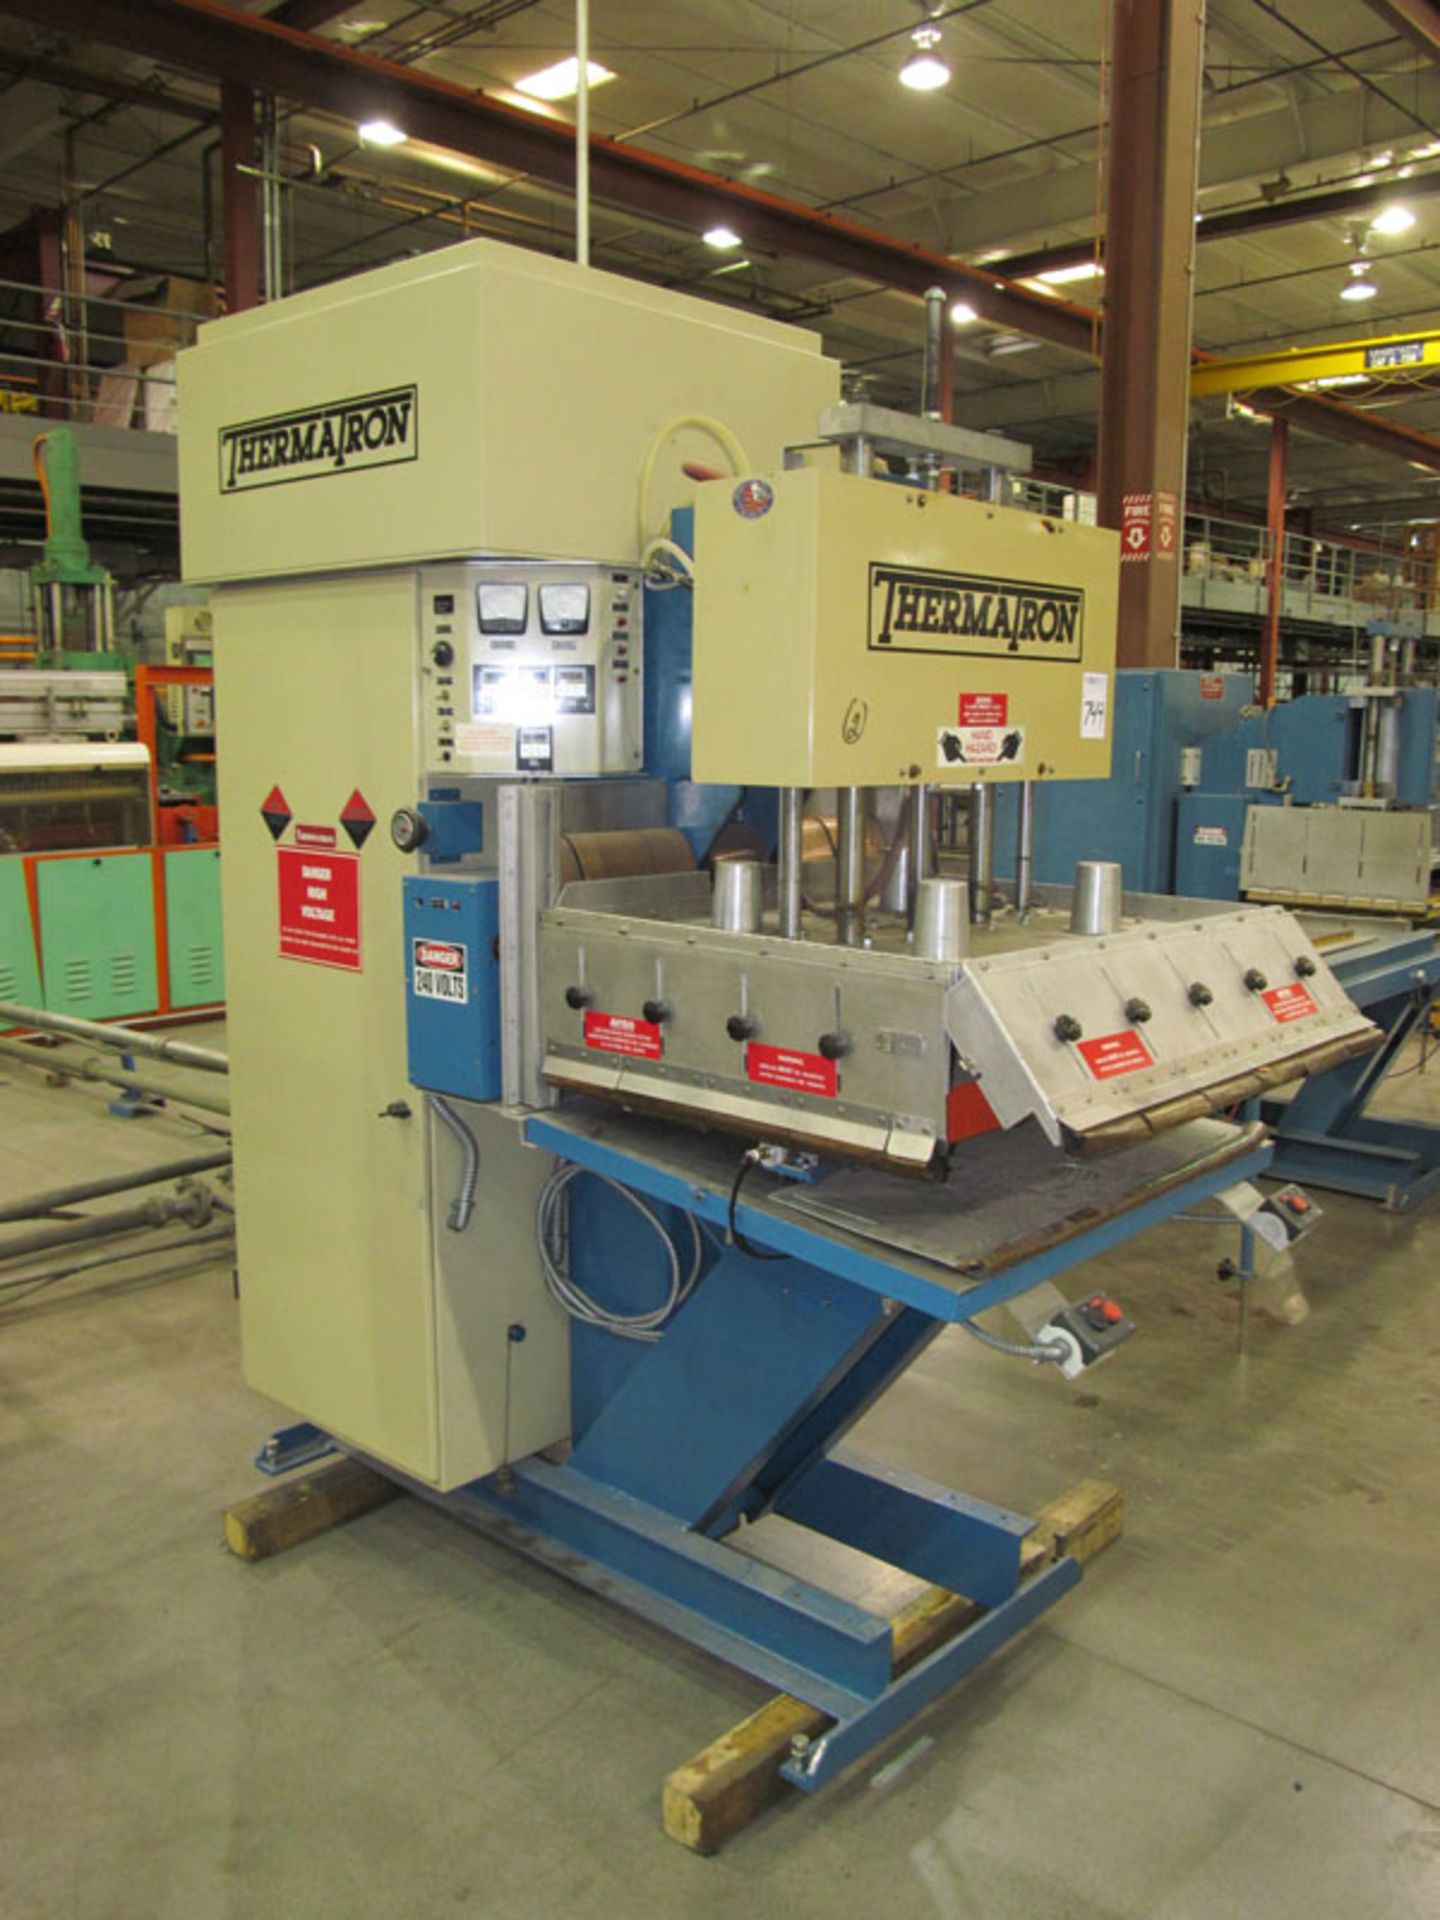 Thermatron F20-30 Heat Seal Press, w/ Rotary Table, s/n 6271-01, Loading Fee: $300 - Image 2 of 5